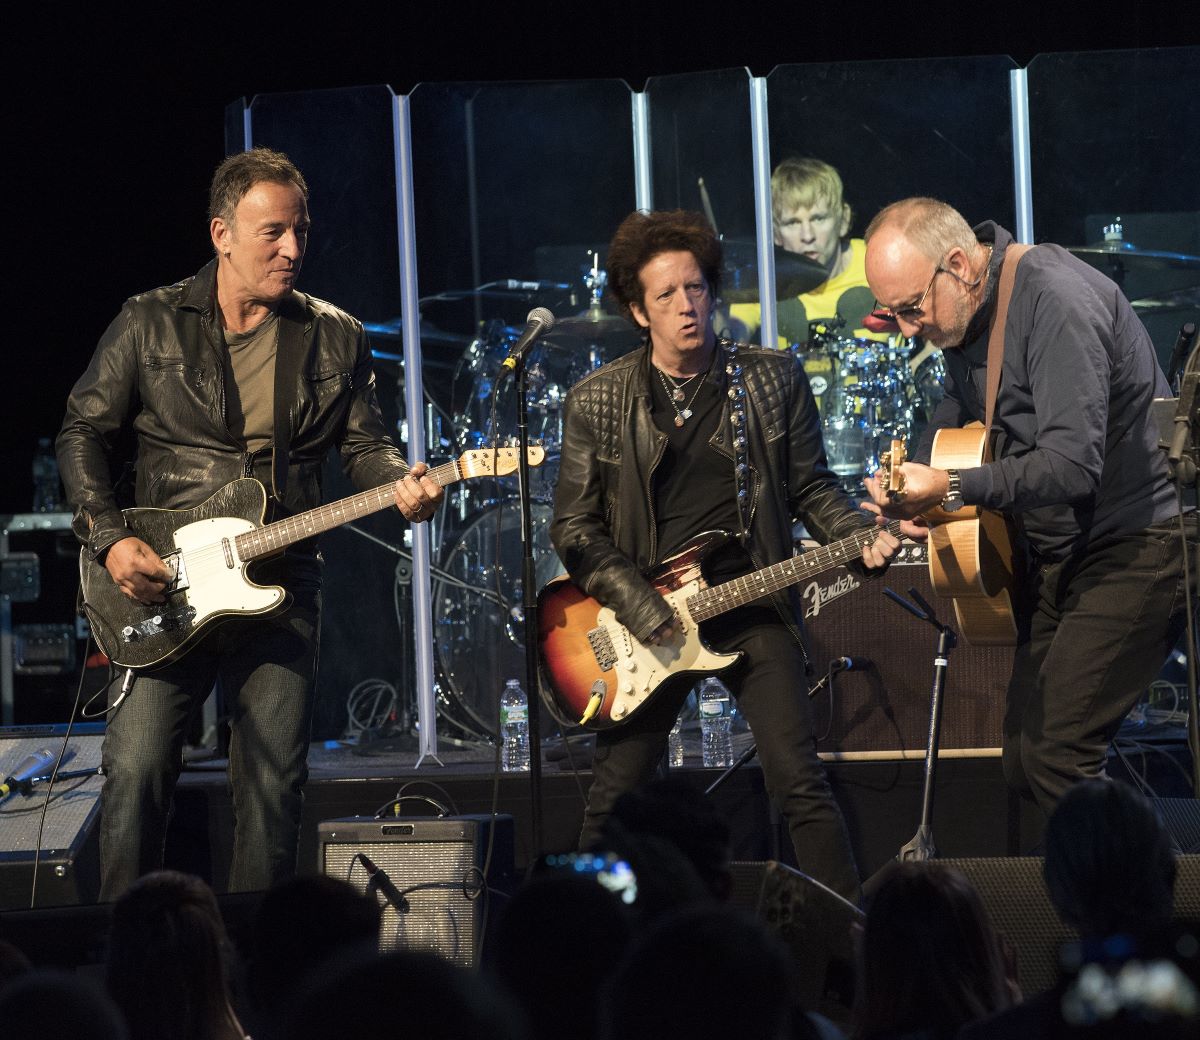 Bruce Springsteen plays guitar on a stage with Willie Nile and Pete Townshend.